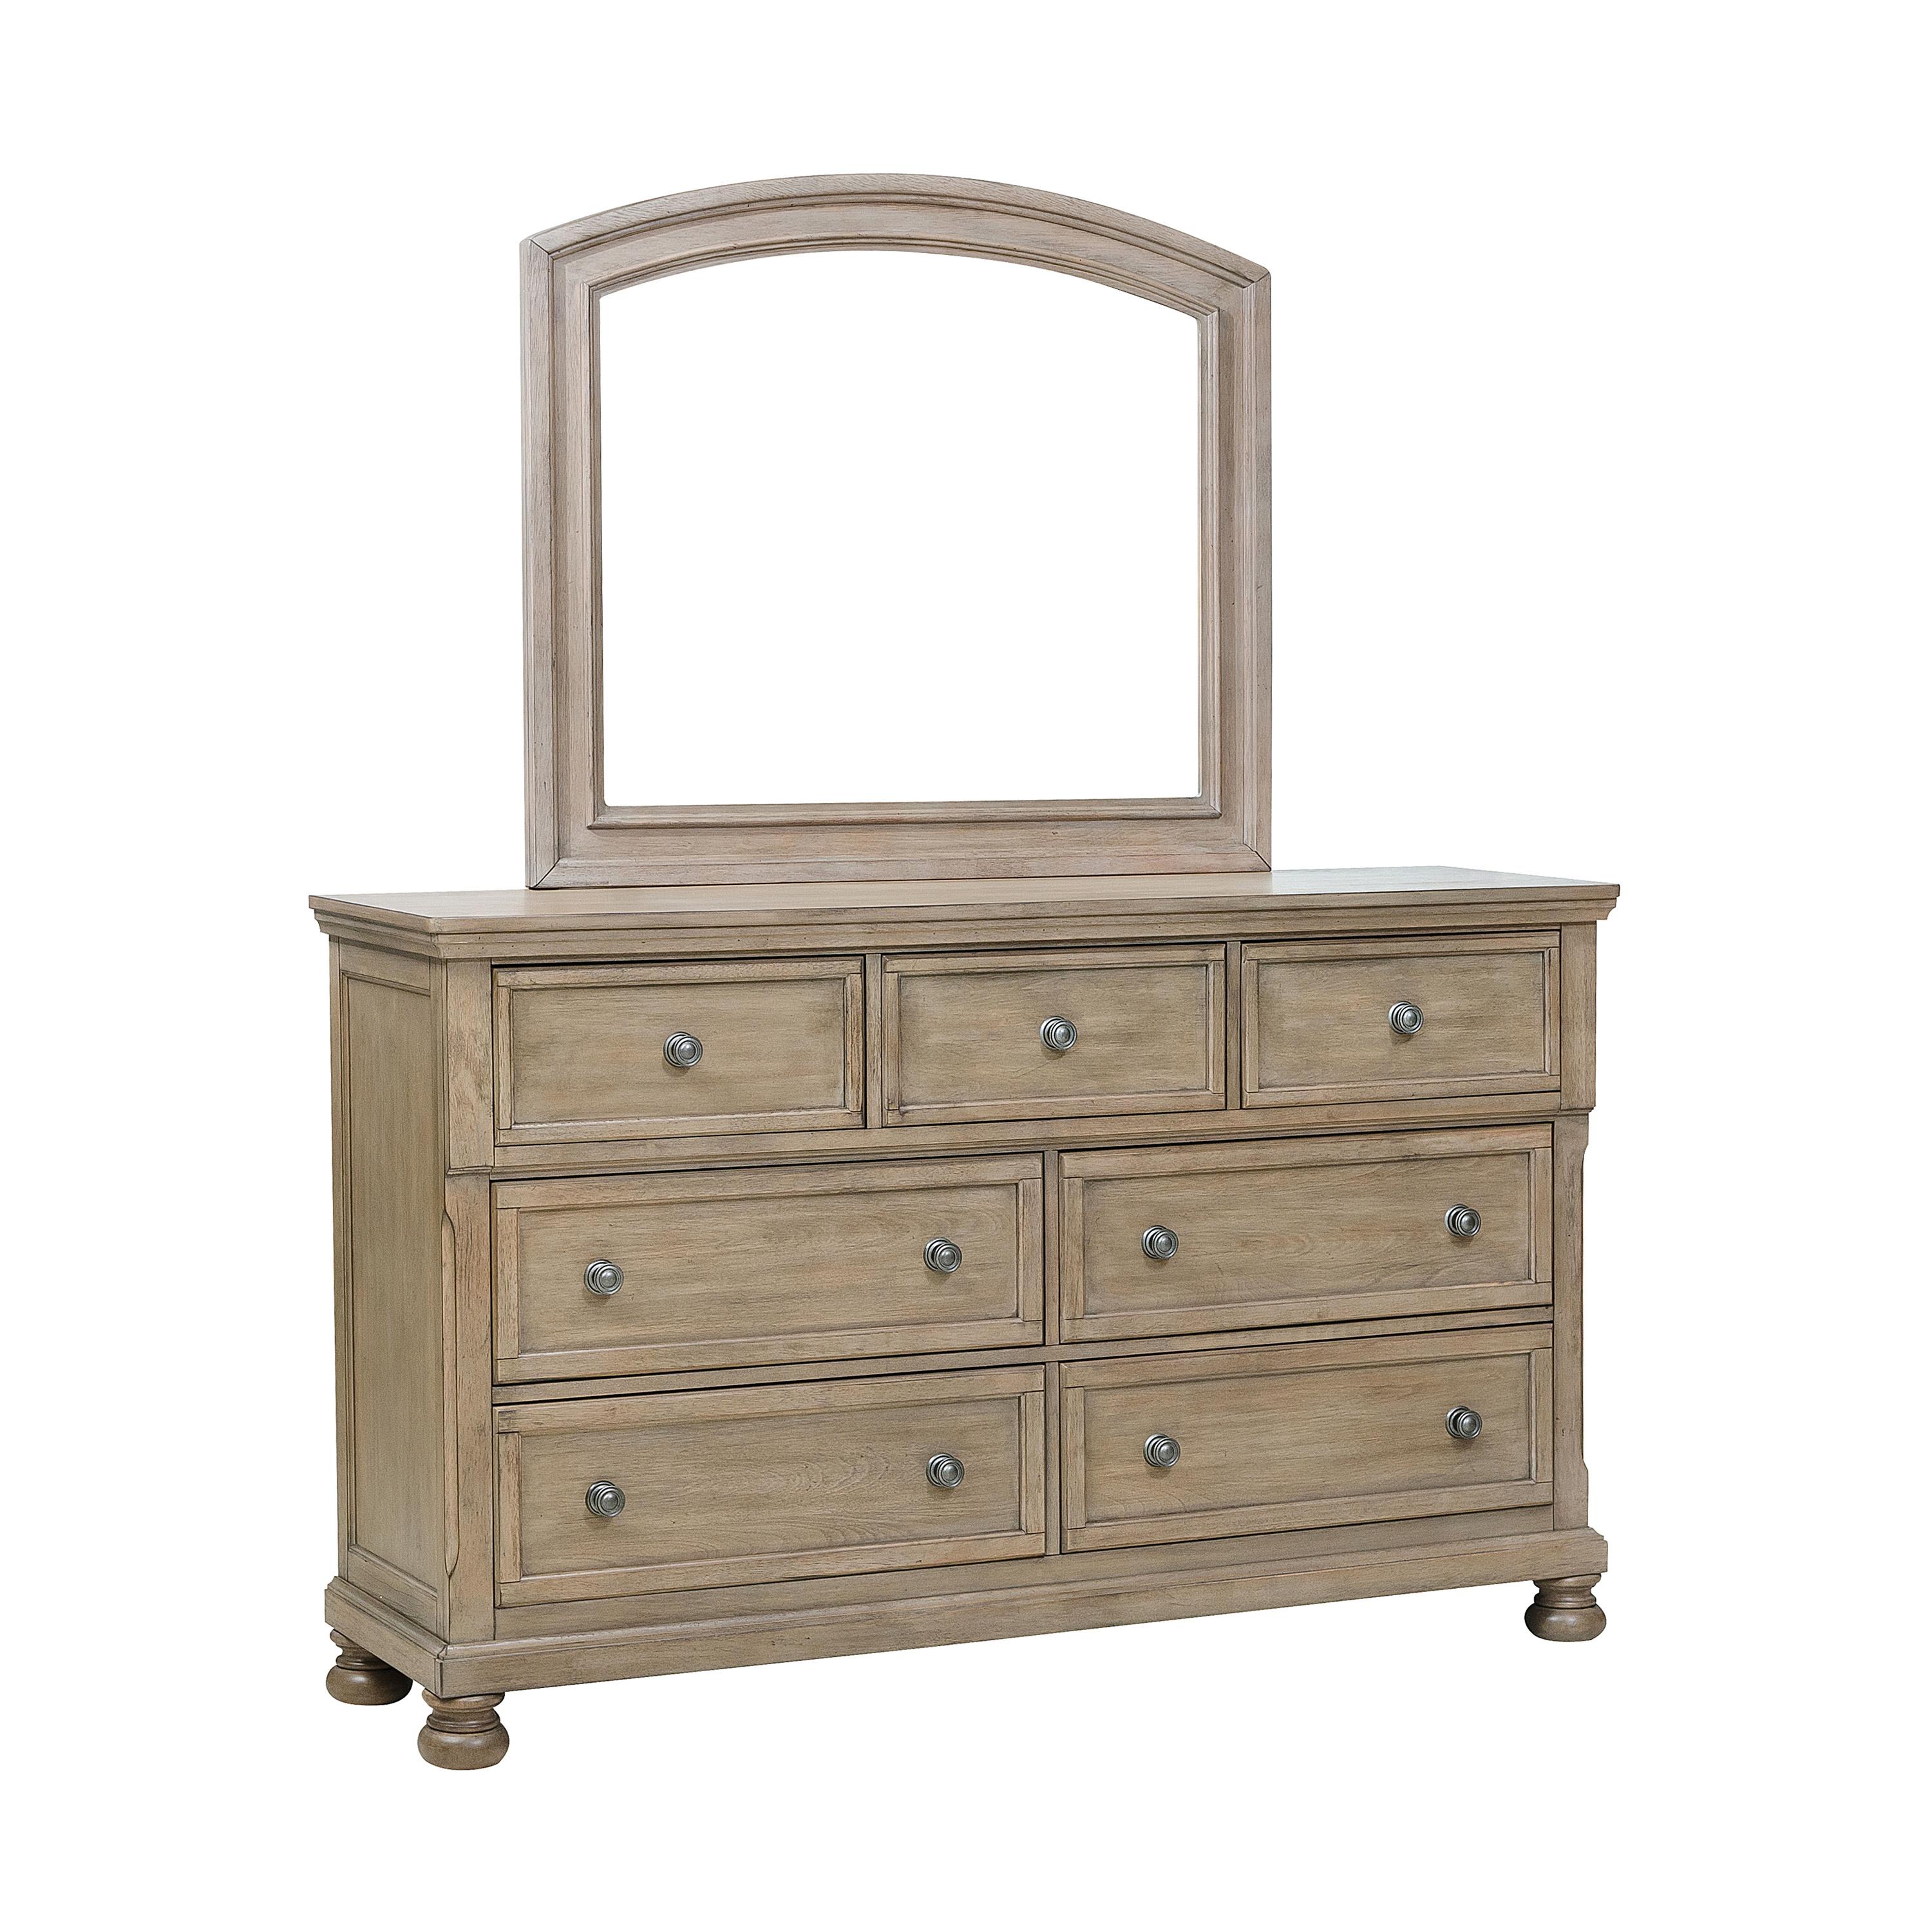 Transitional Dresser w/Mirror 2259GY-5*6-2PC Bethel 2259GY-5*6-2PC in Gray 